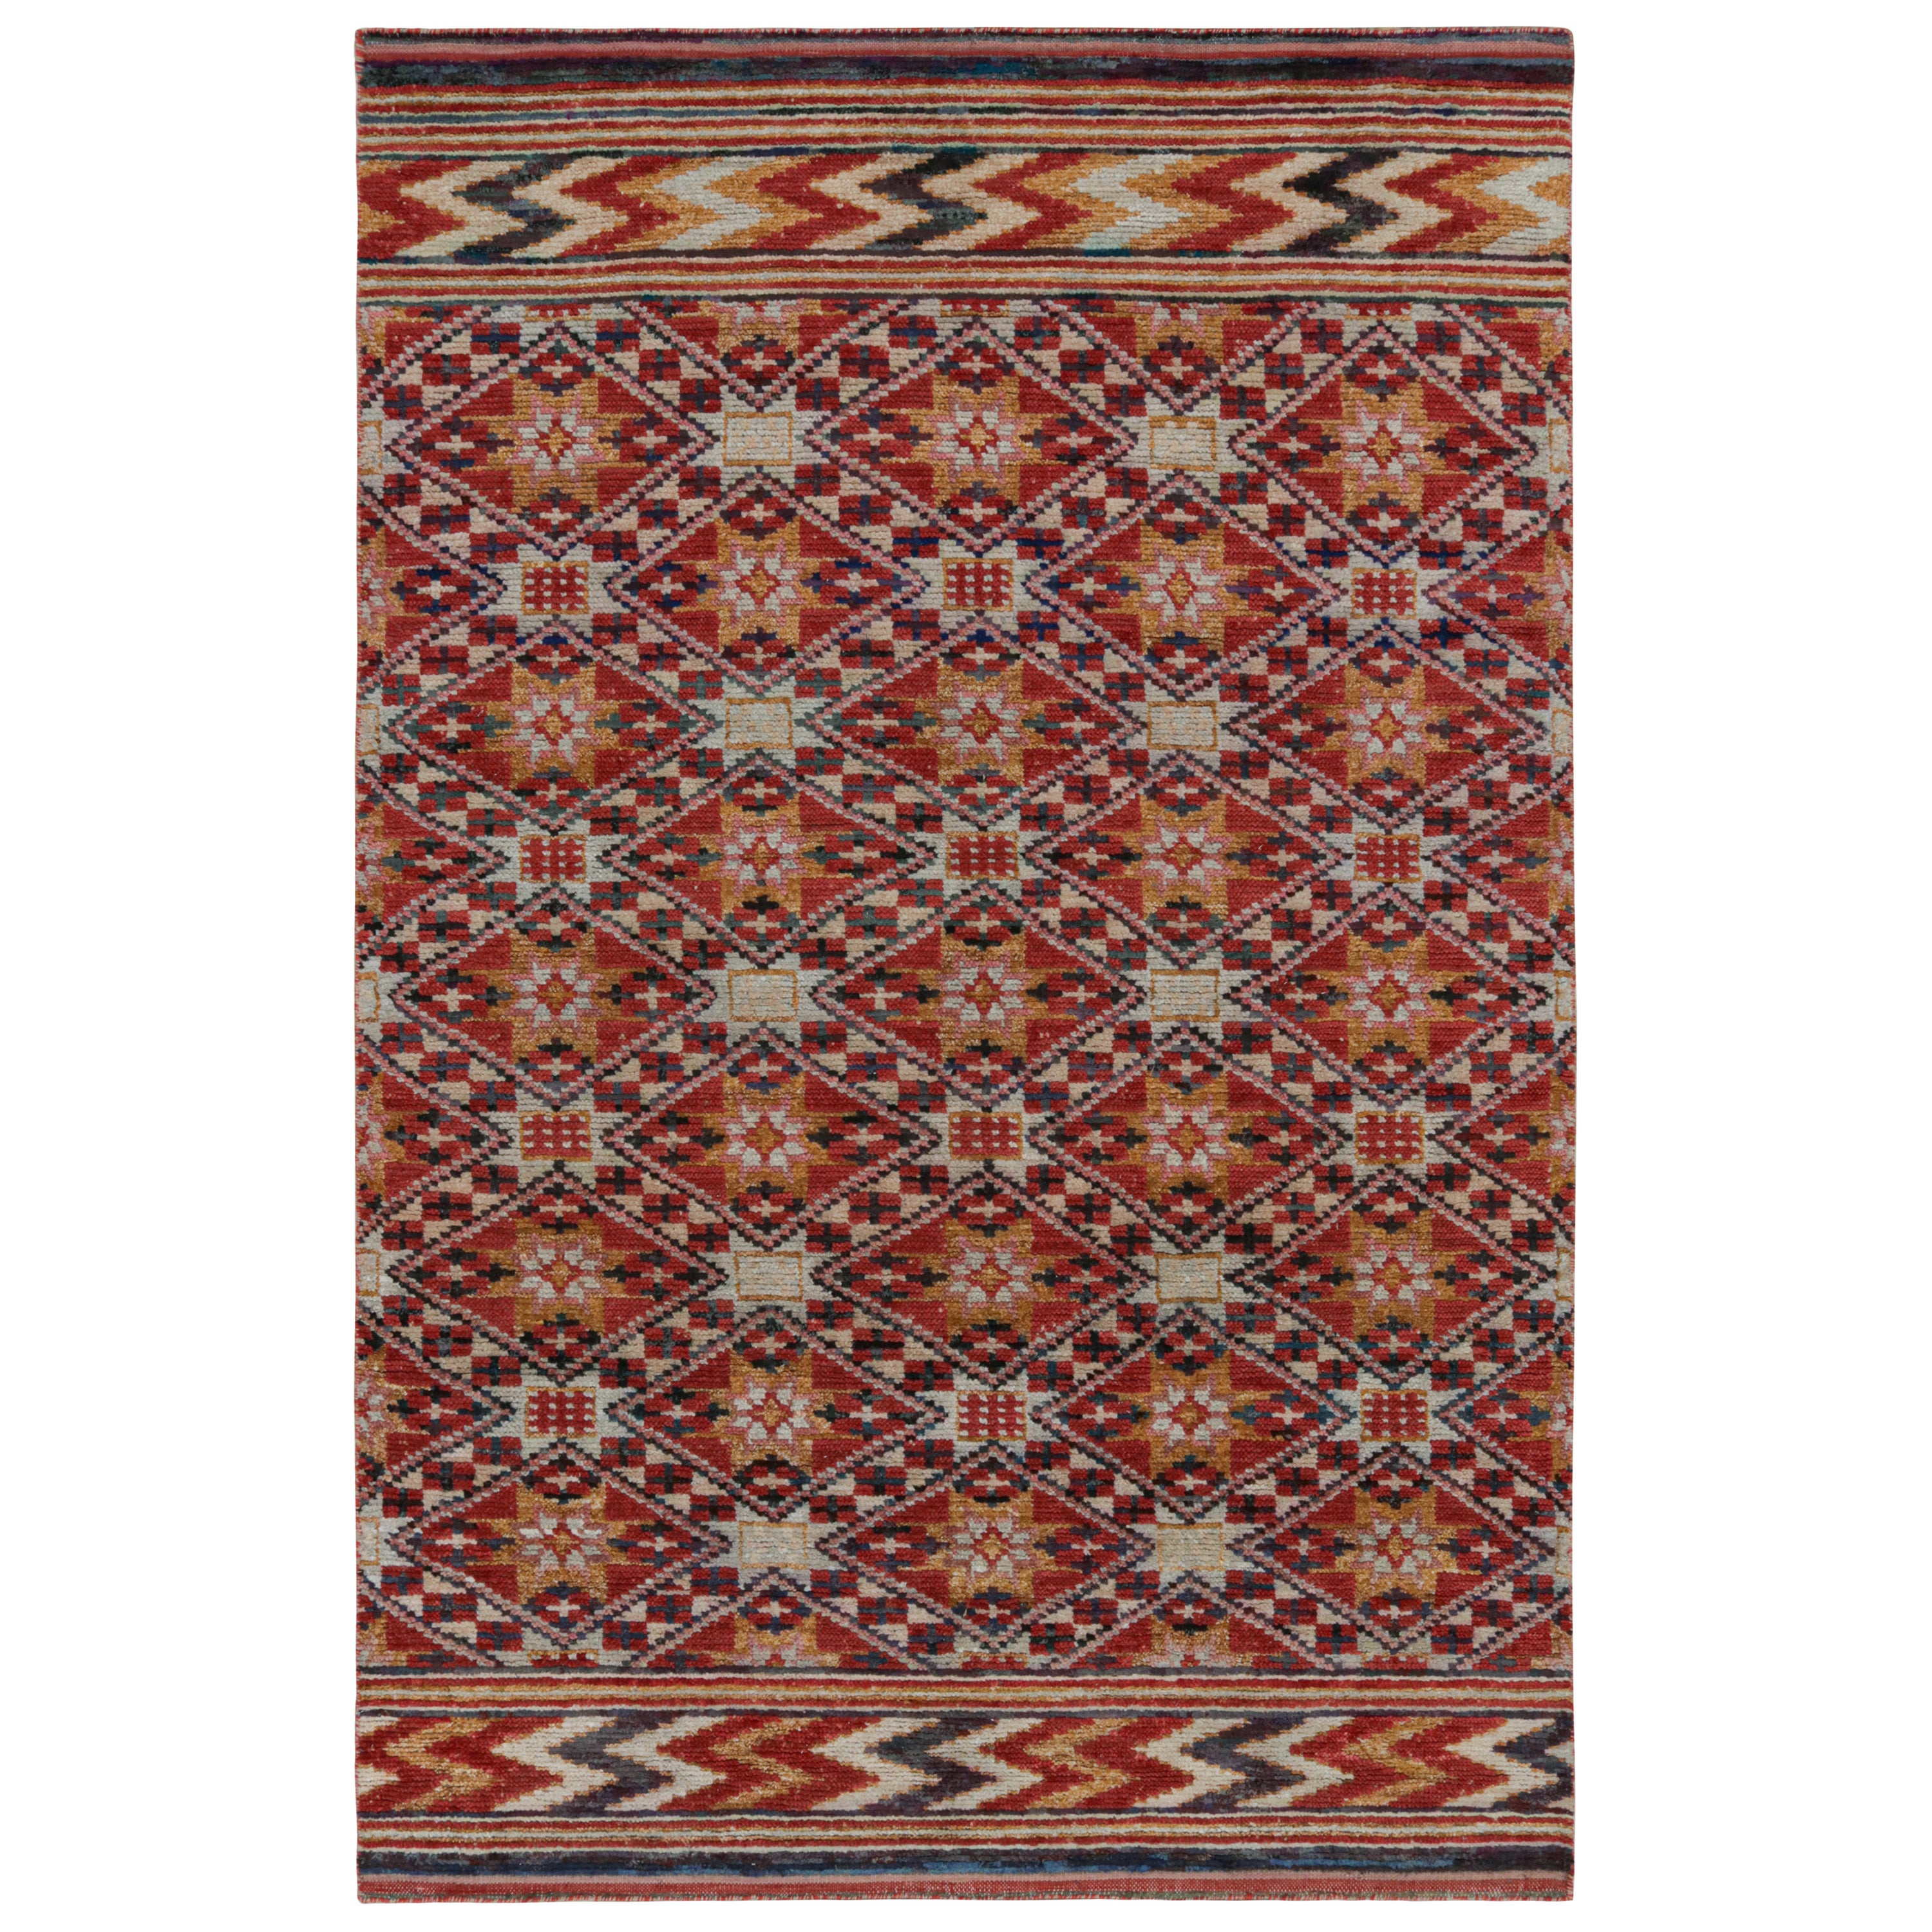 Rug & Kilim’s Moroccan Style Rug in Red with Gold Geometric Patterns